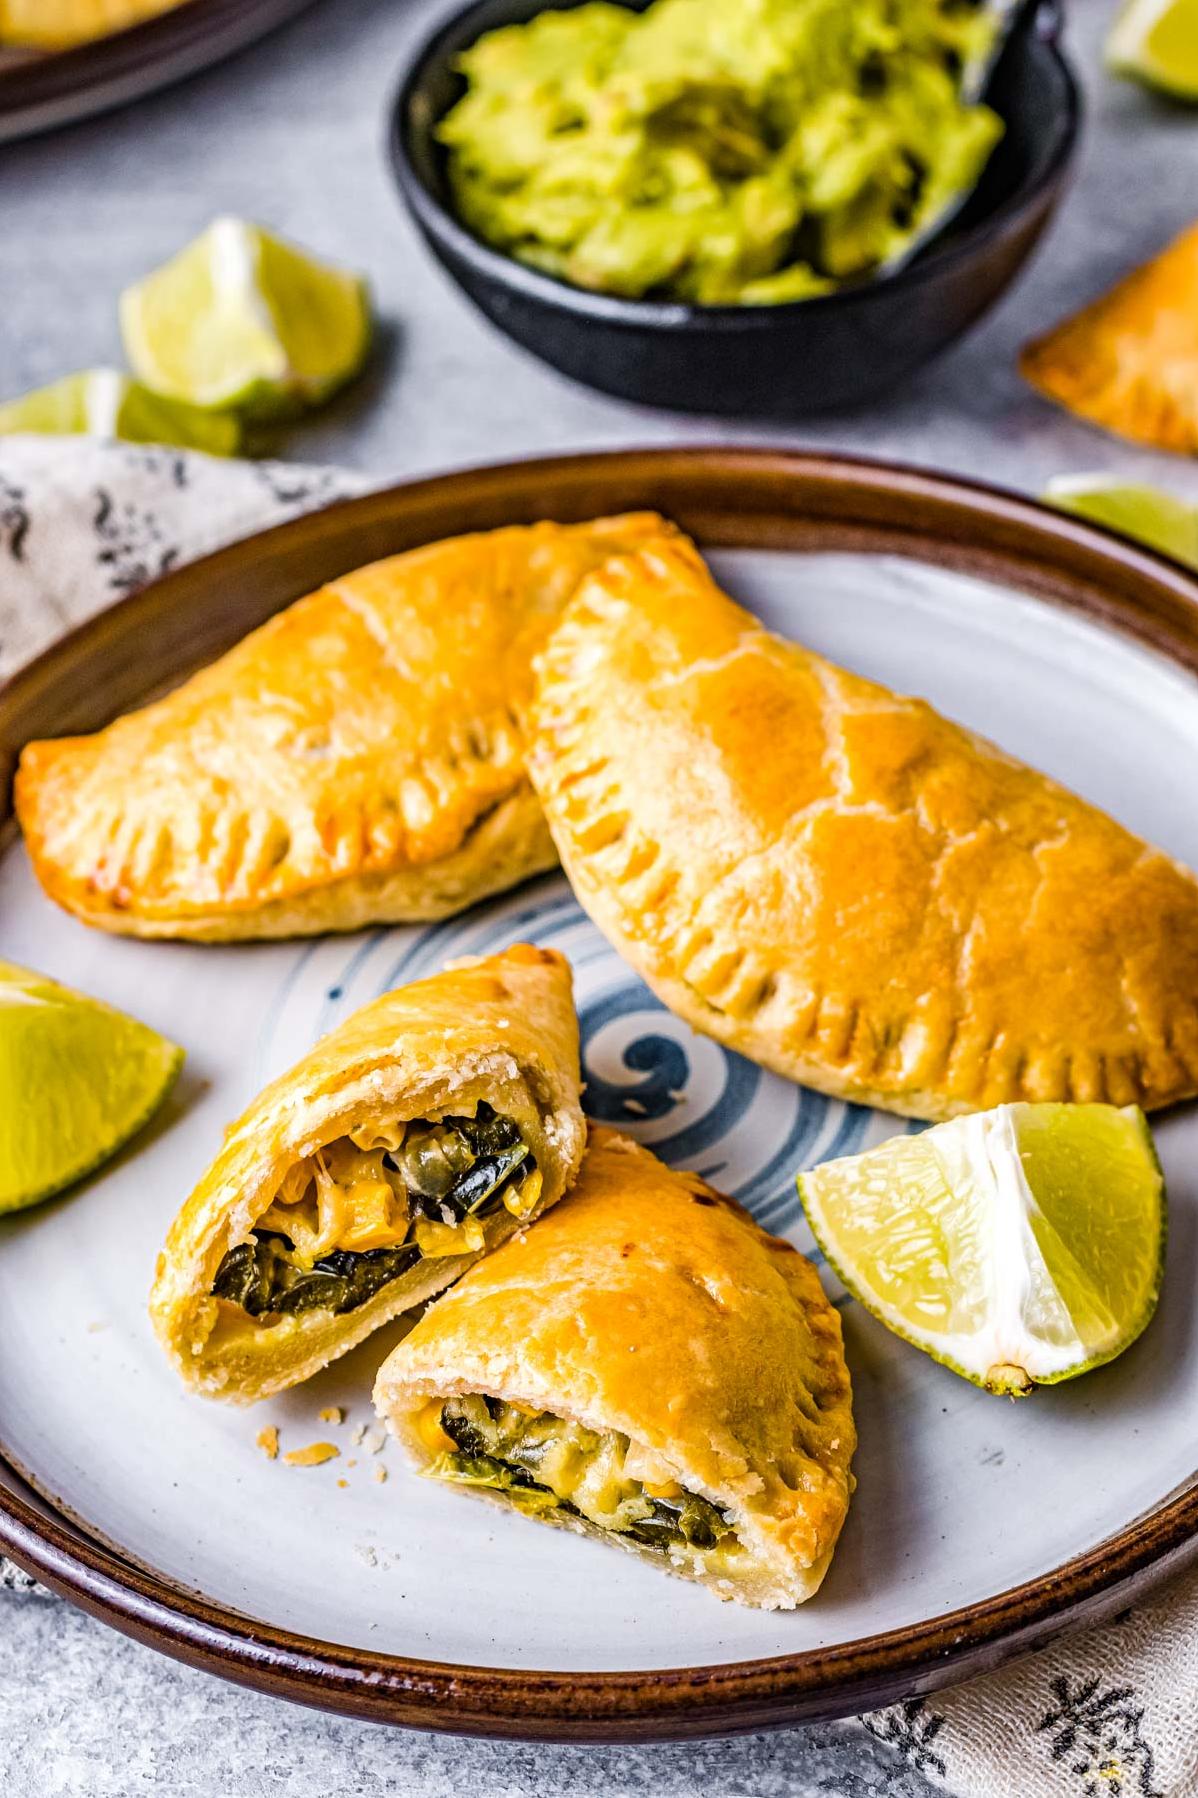  Nothing beats the satisfying crunch of the perfect empanada!